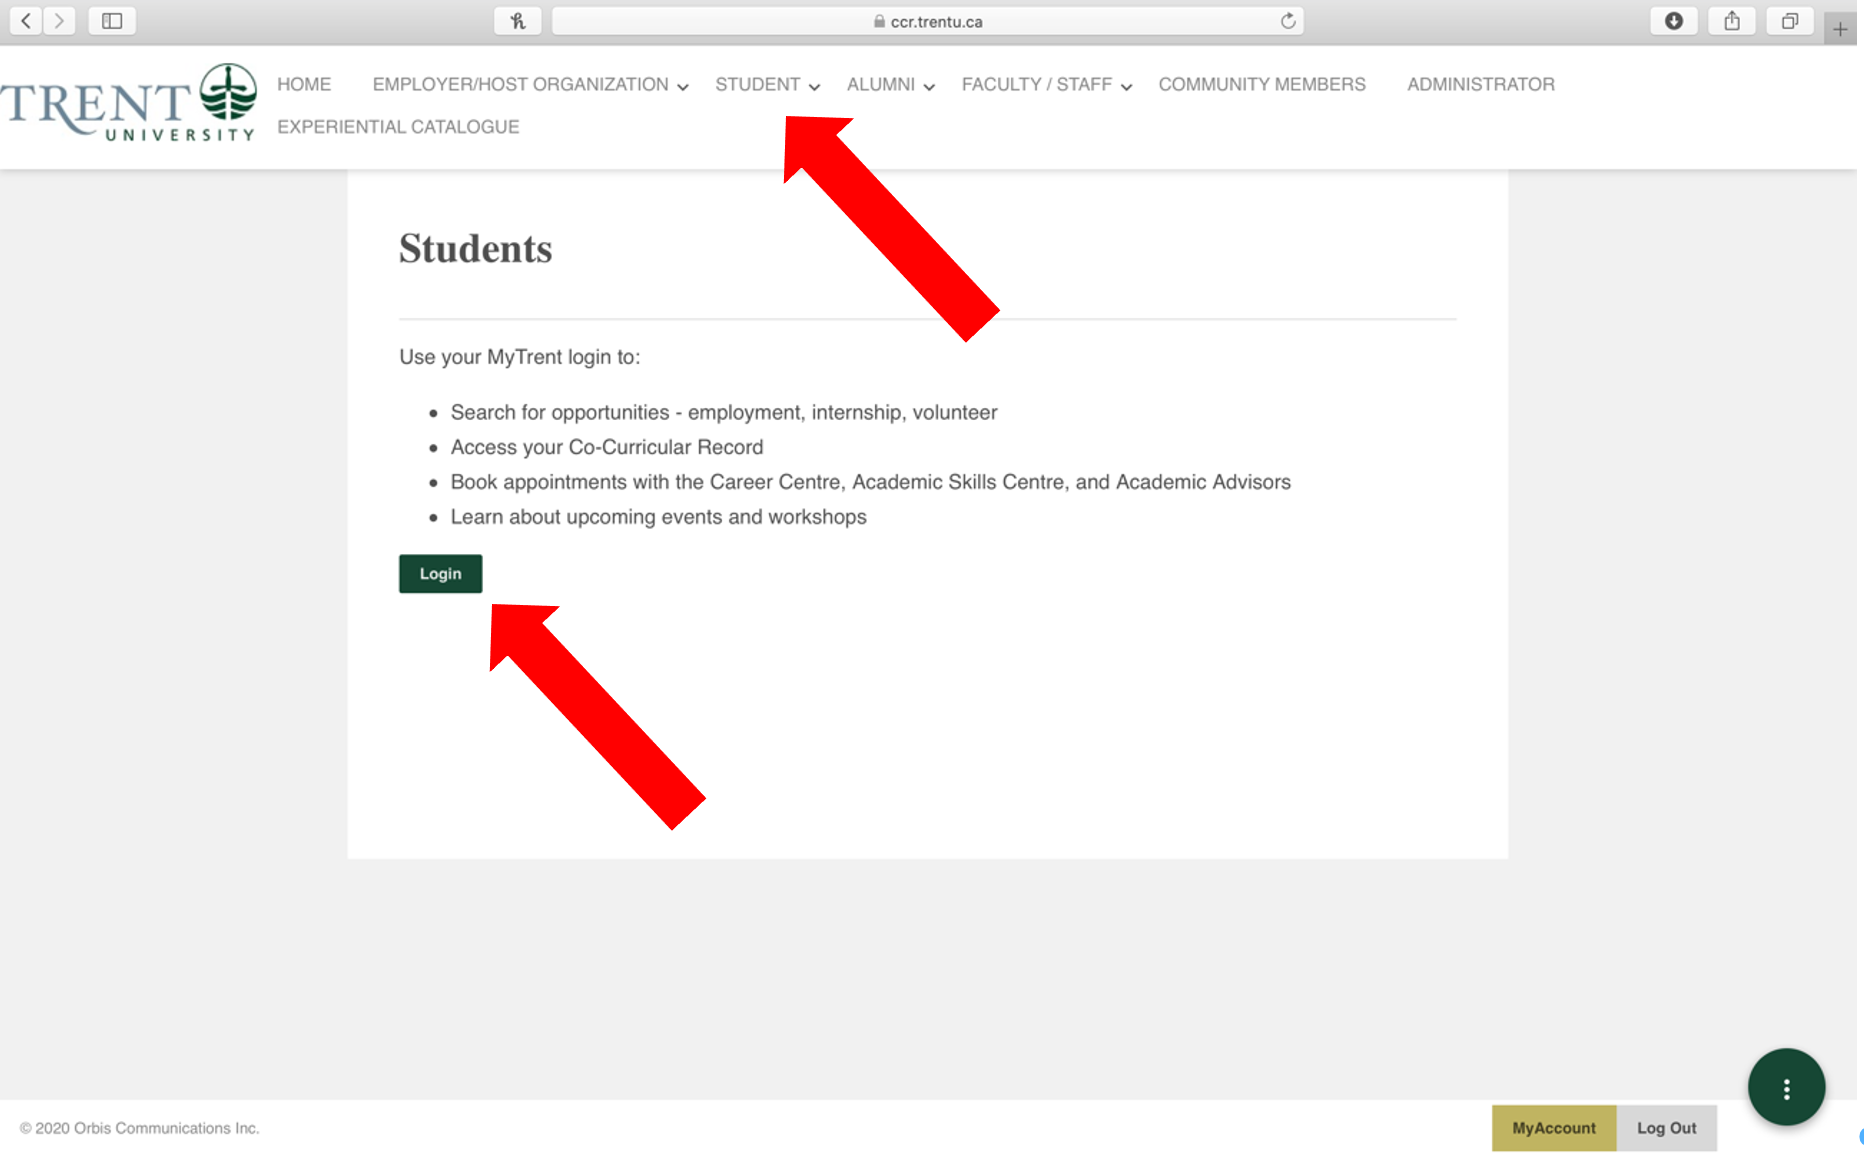 Screenshot of the Student login screen of the Student Experience Portal. One red arrow points to the Student heading in navigation and a second arrow points to "login".